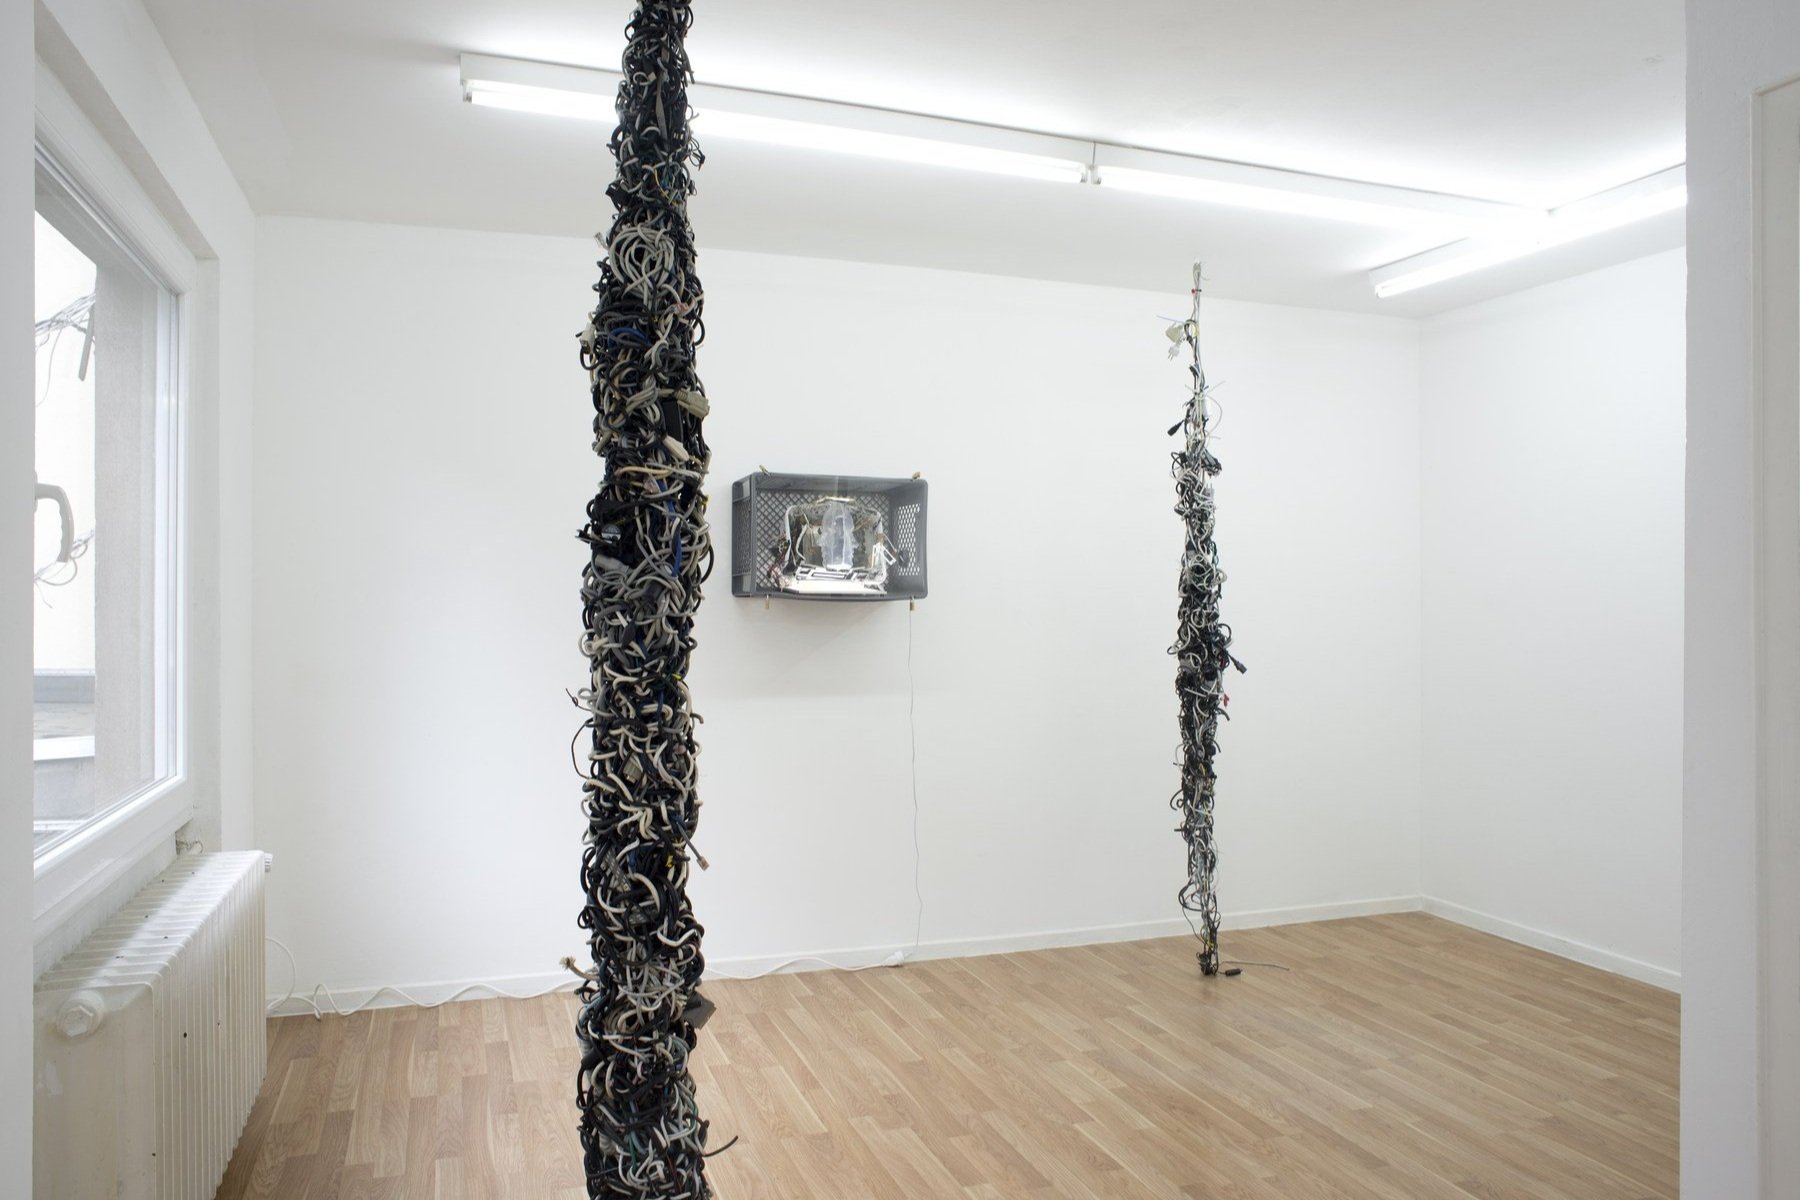 Joachim Coucke (BE) “cable sculptures” 